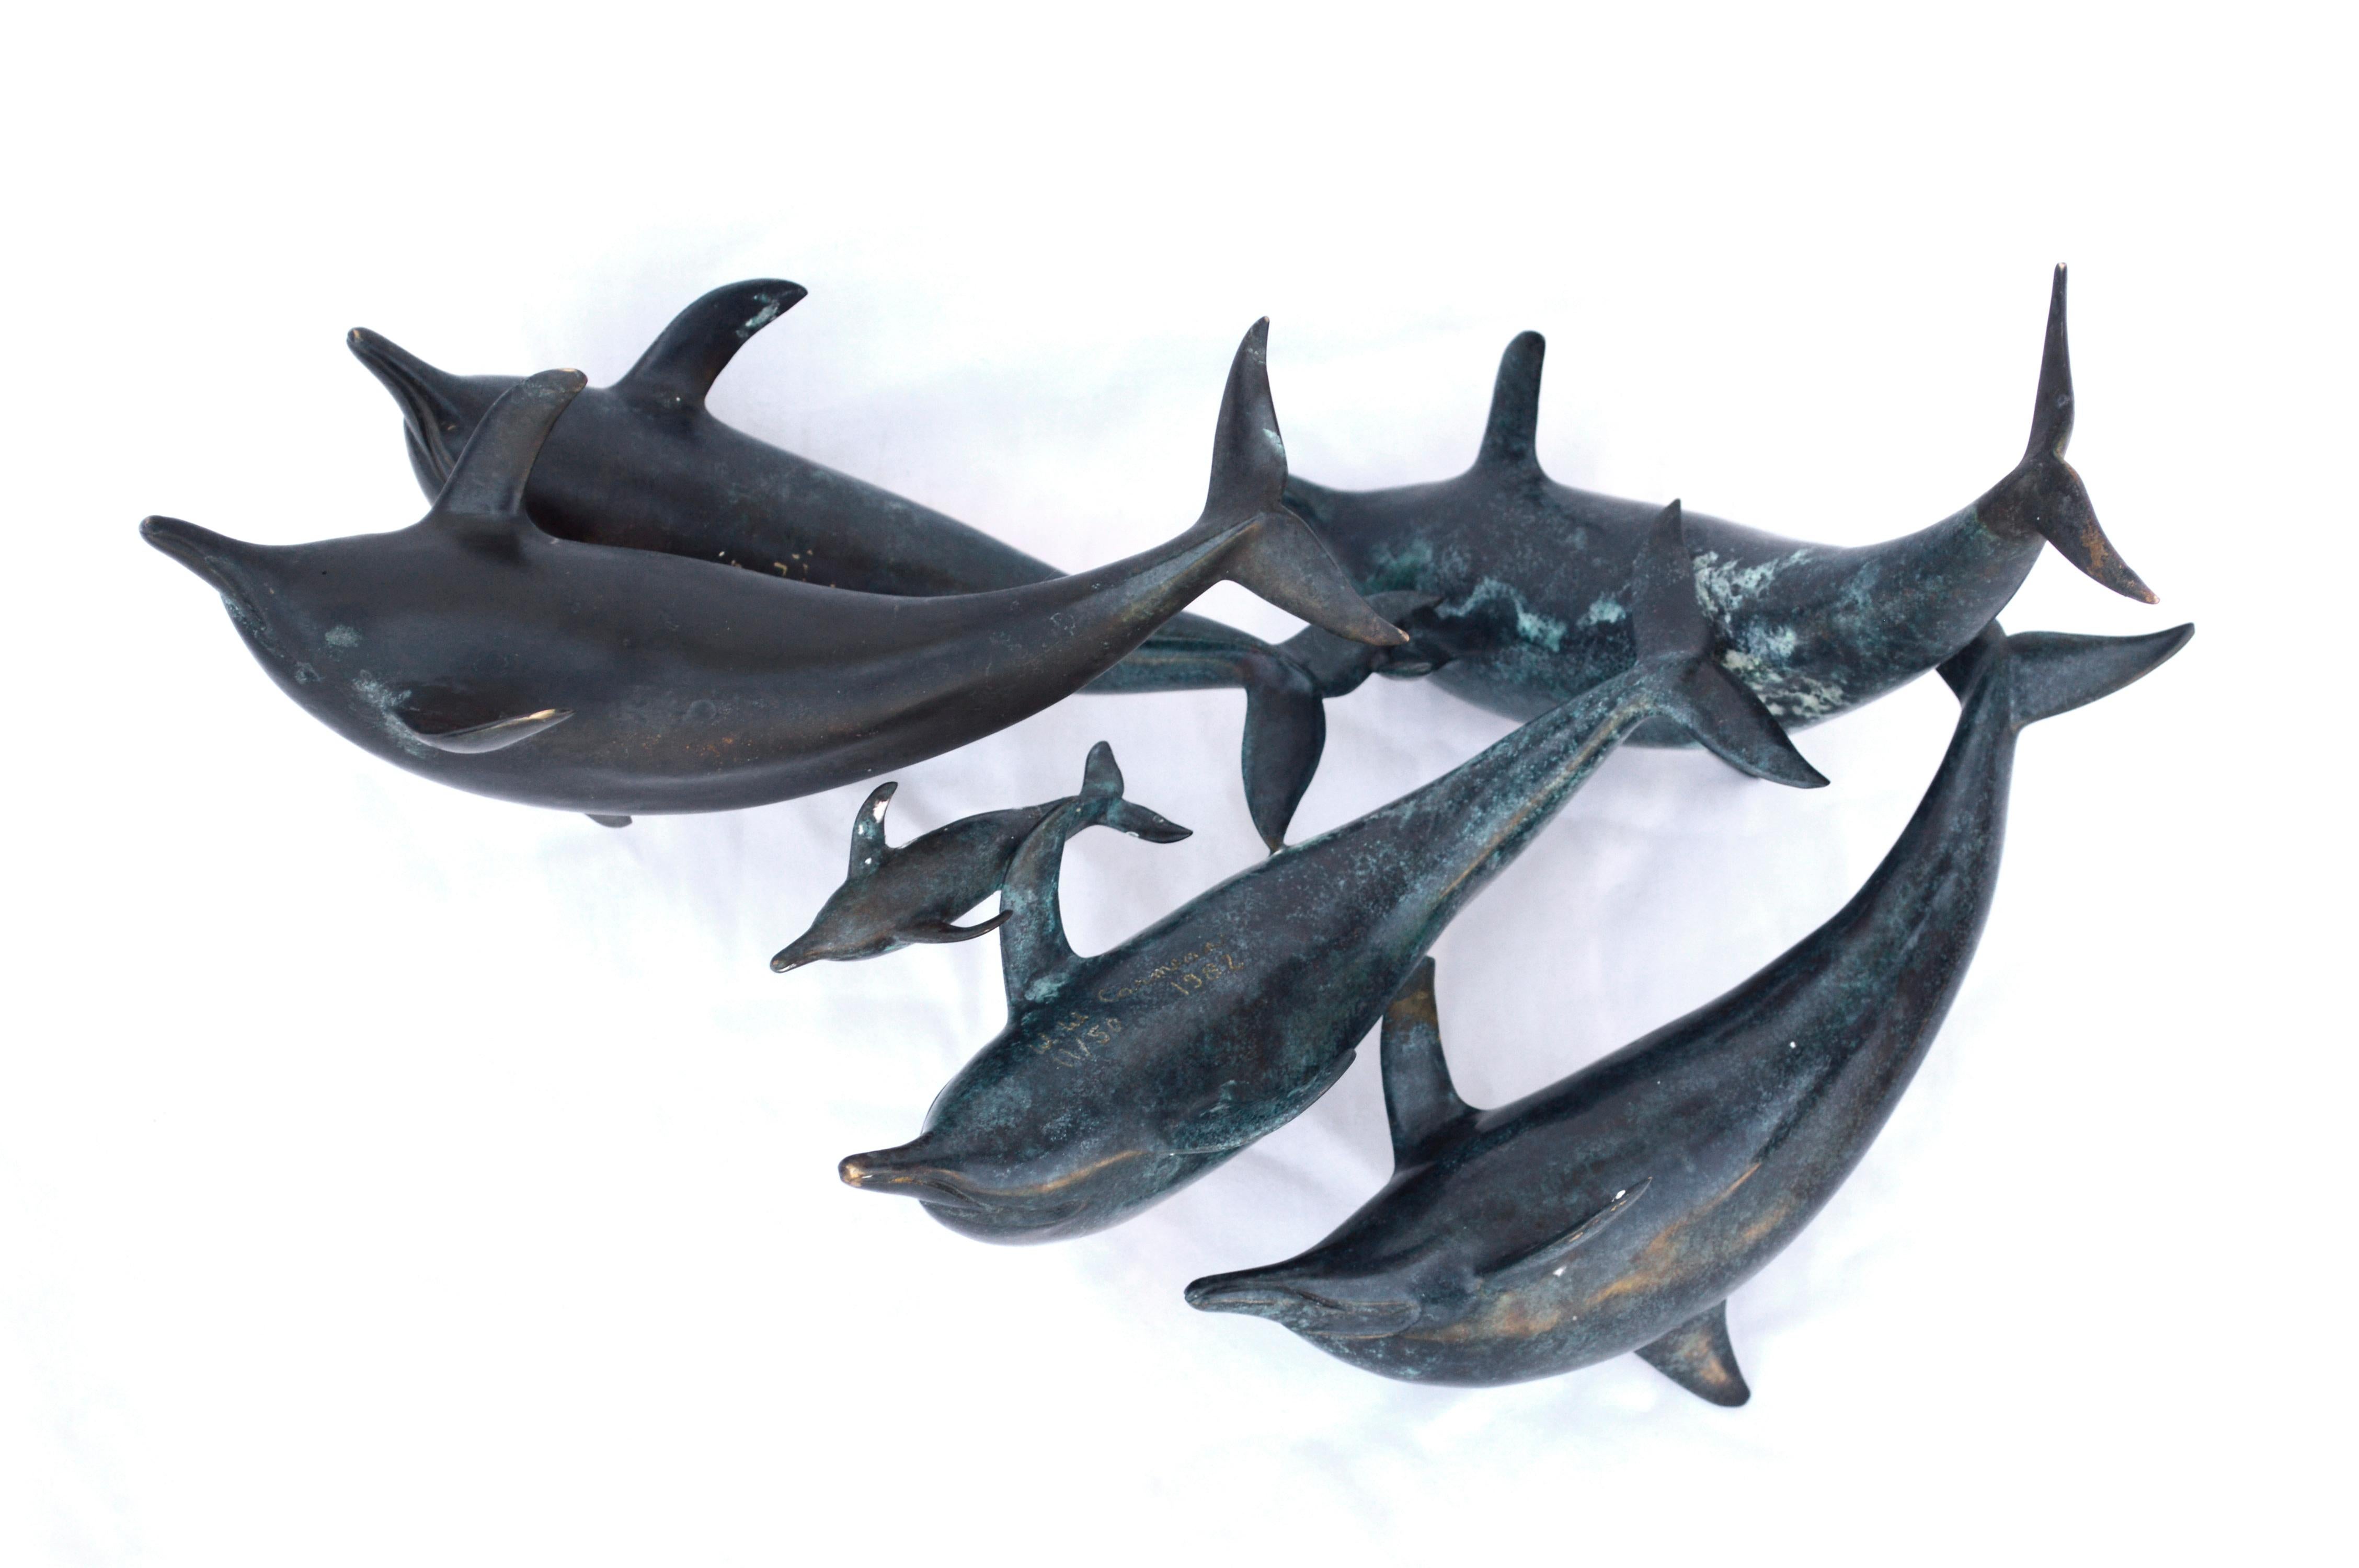 Pod of Dolphins #11 of 50 - Realist Sculpture by Winston Walter Carmean